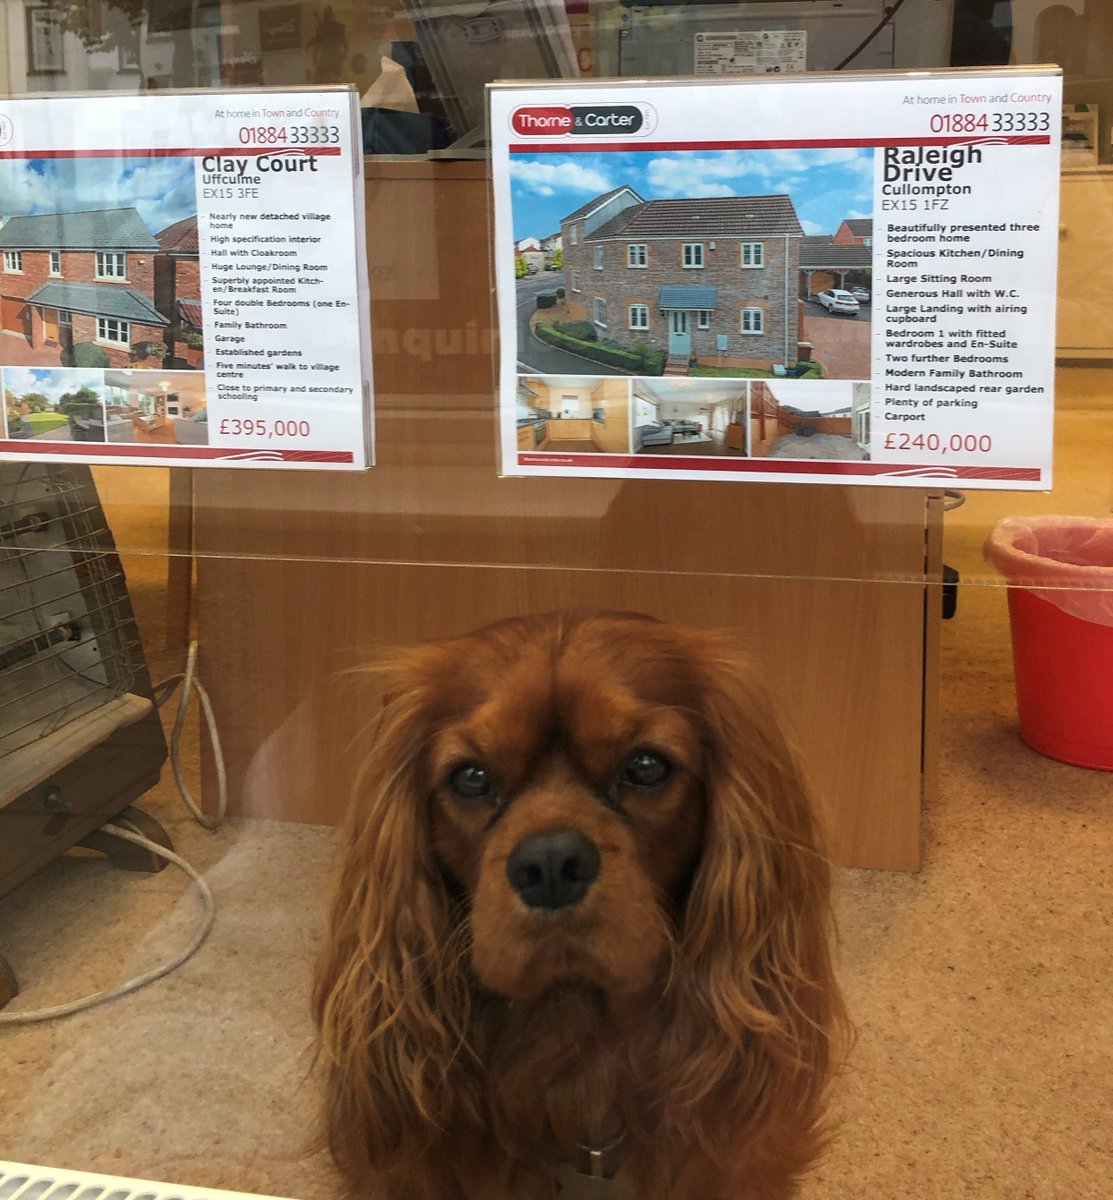 Our office dog, Roo is deciding what house he should buy next... #officedog #dogsoftwitter #kingcharlescavalier #estateagents #independentestateagent #familyestateagent #homeforsale #propertyforsale #doggos